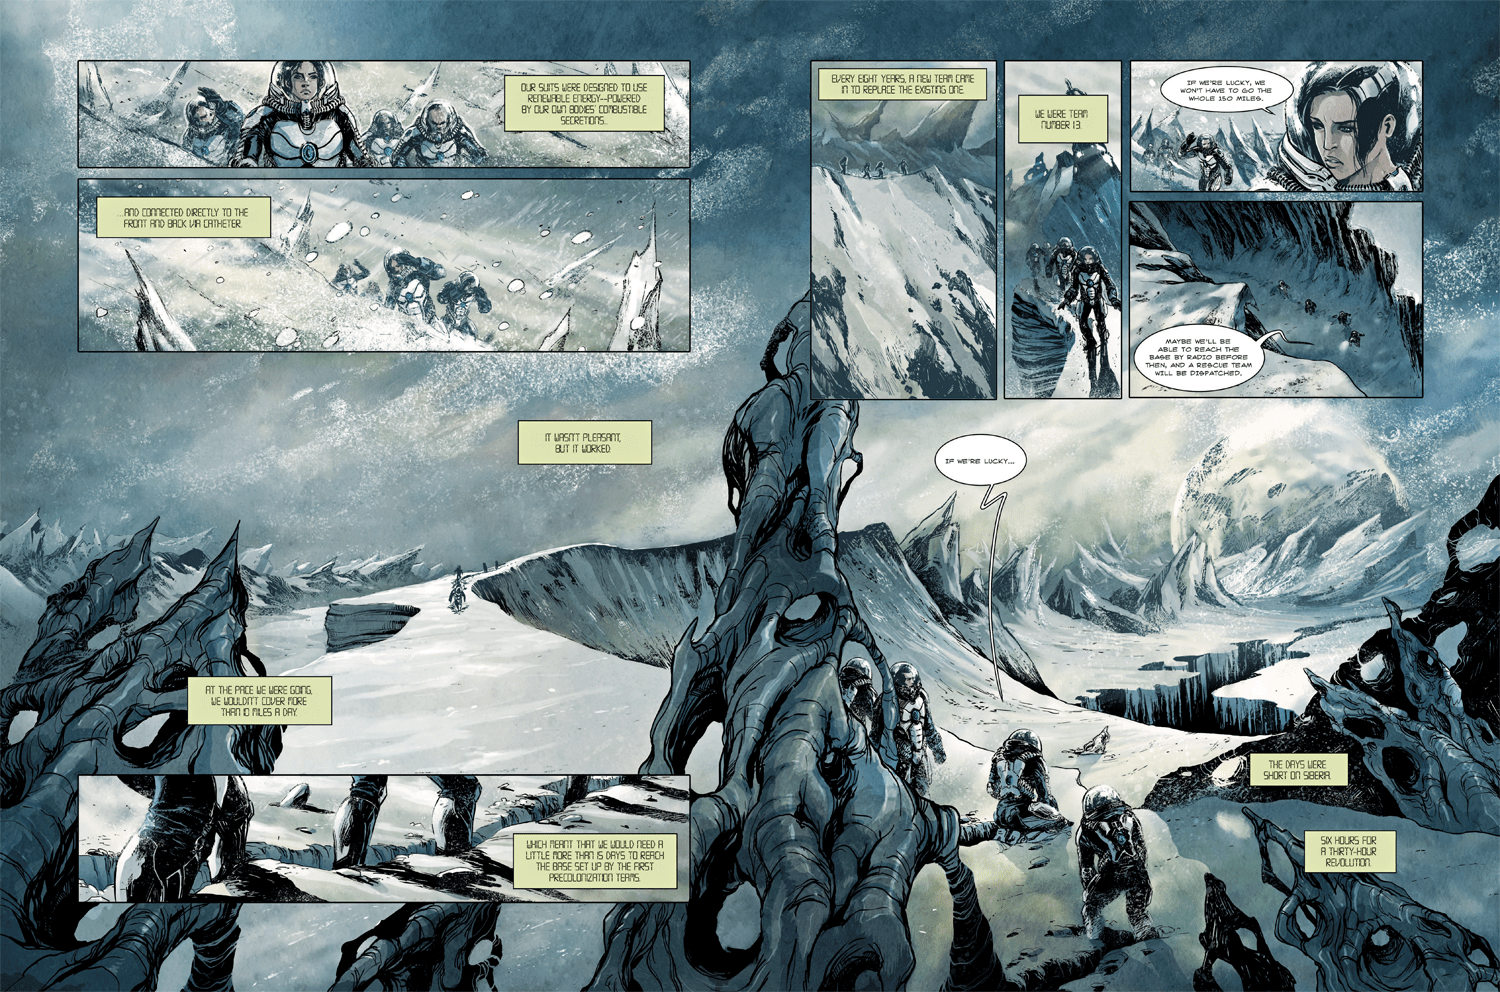 A Colonization Mission Goes Horribly Wrong In This First Look At The English Translation Of Siberia 56